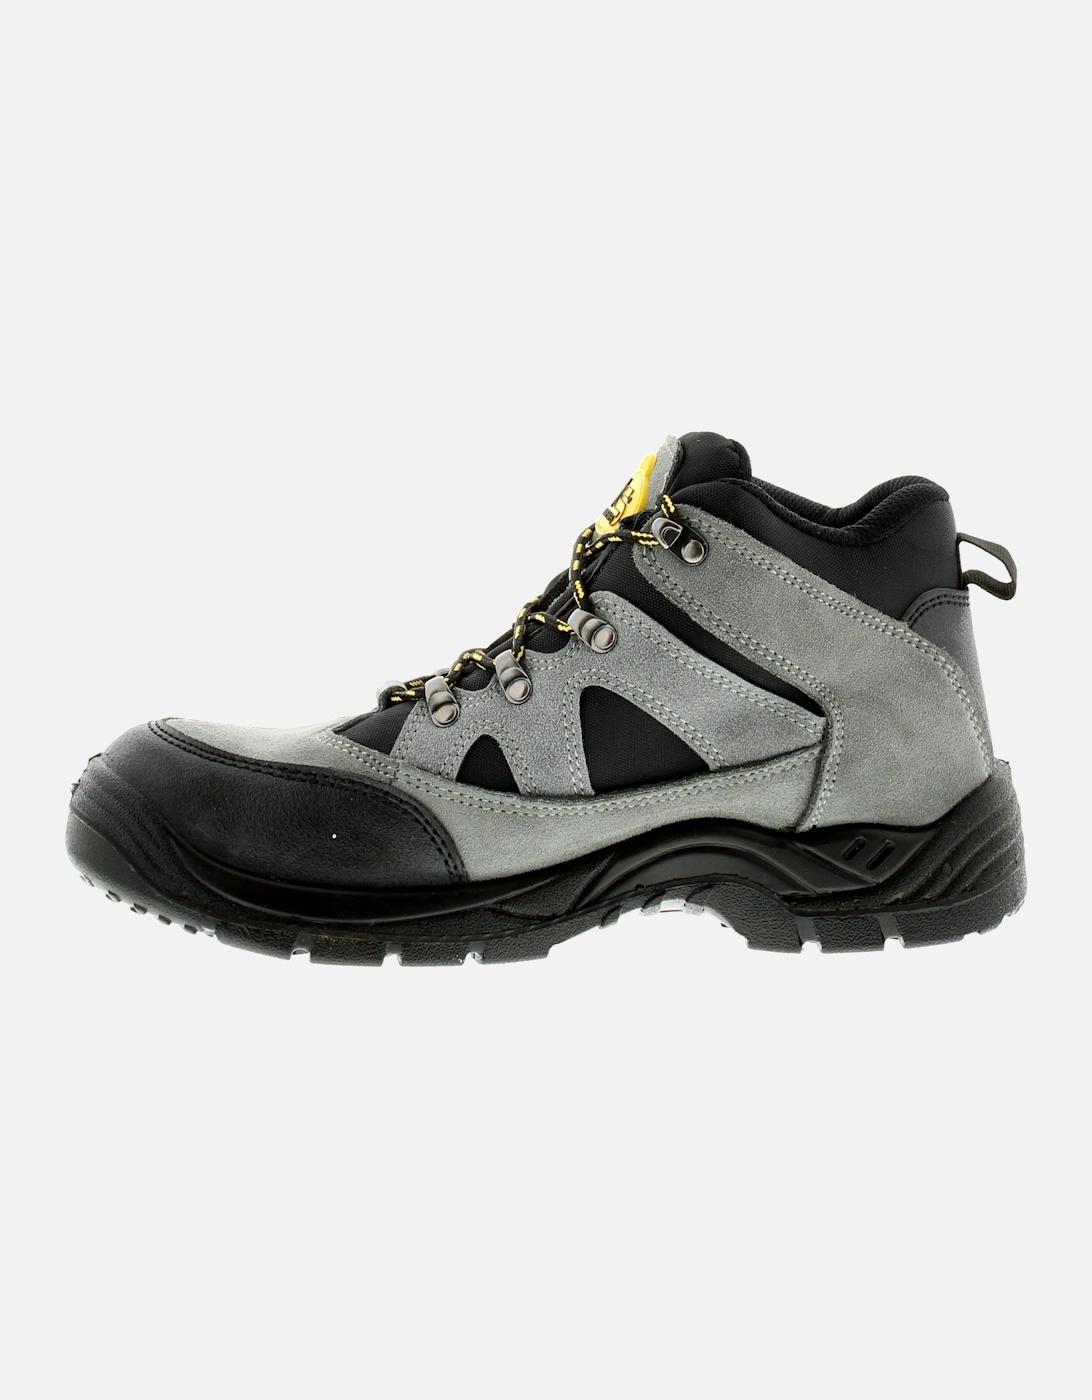 Mens Safety Boots Graham 2 Lace Up grey UK Size